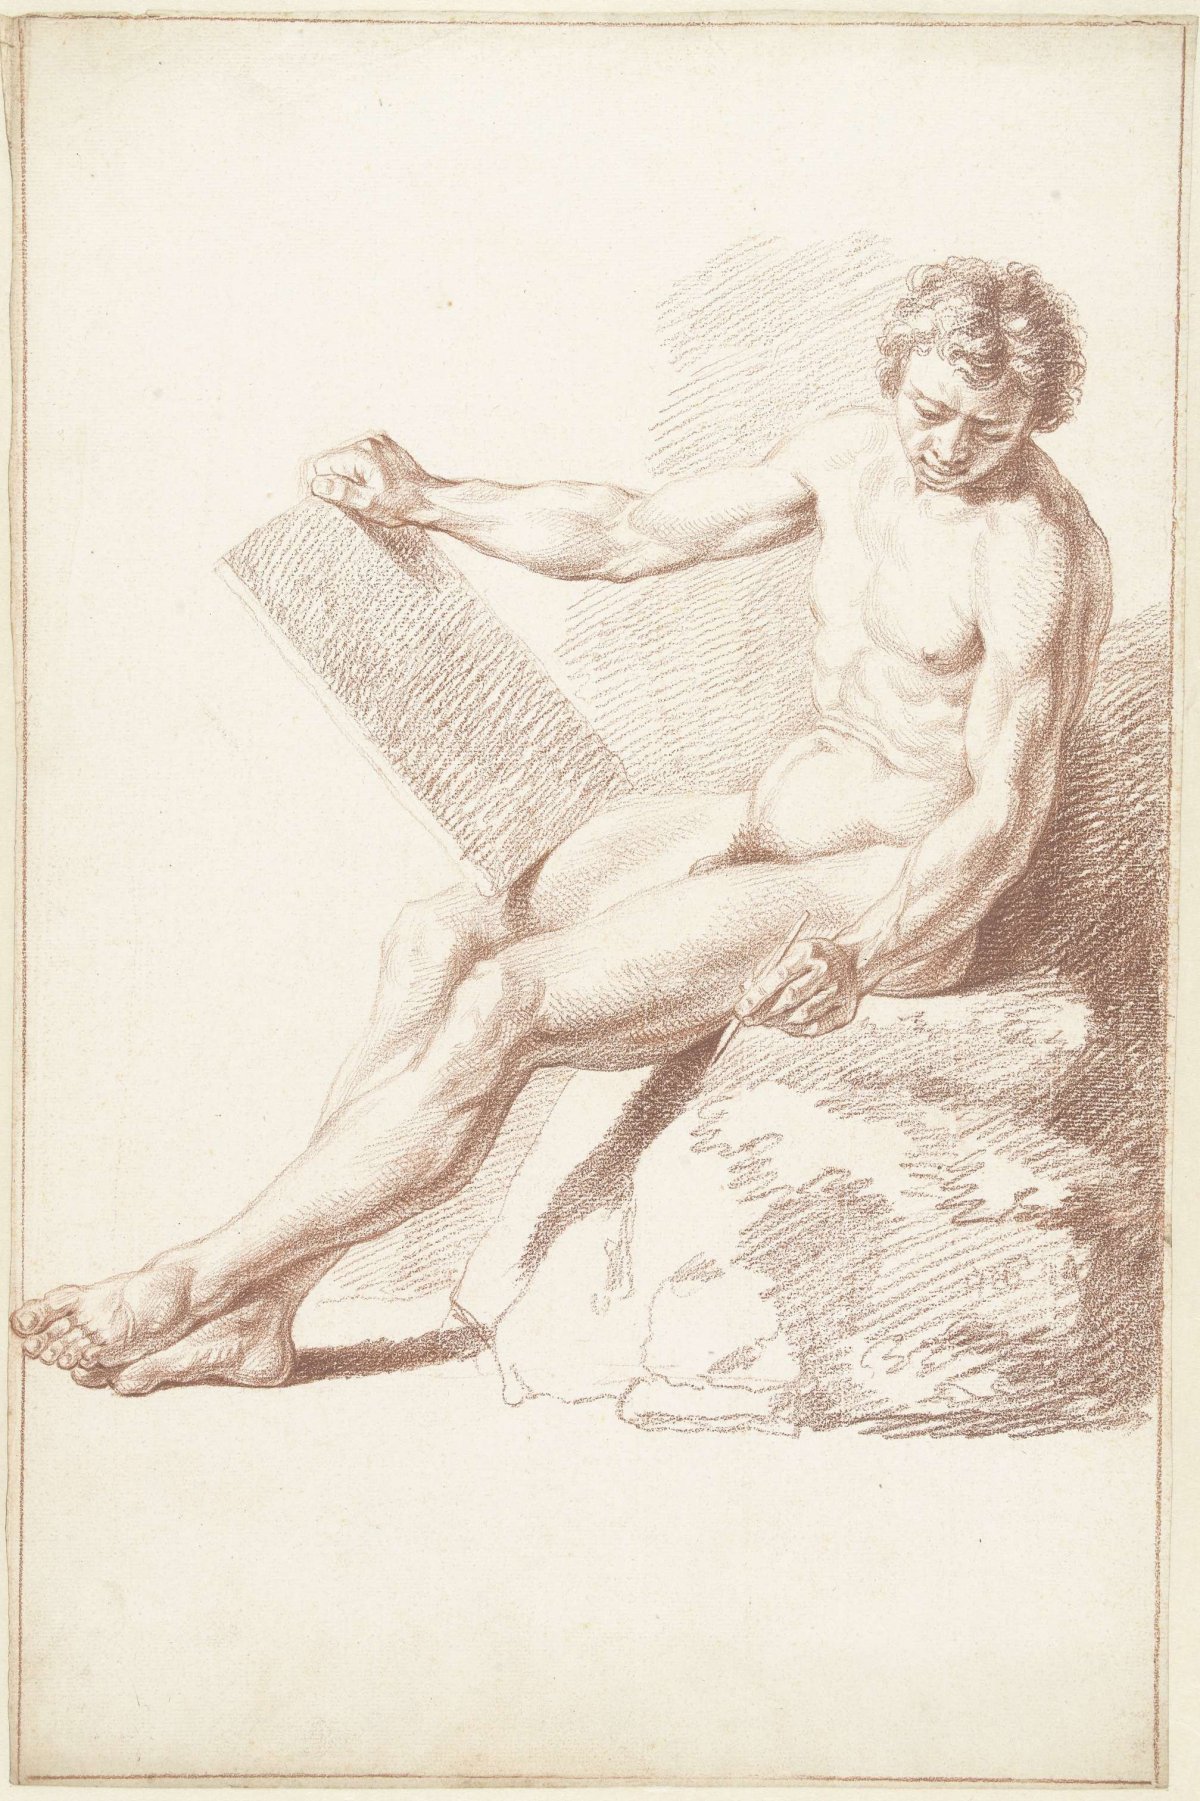 Seated academically, as a draftsman, Louis Fabritius Dubourg, 1726